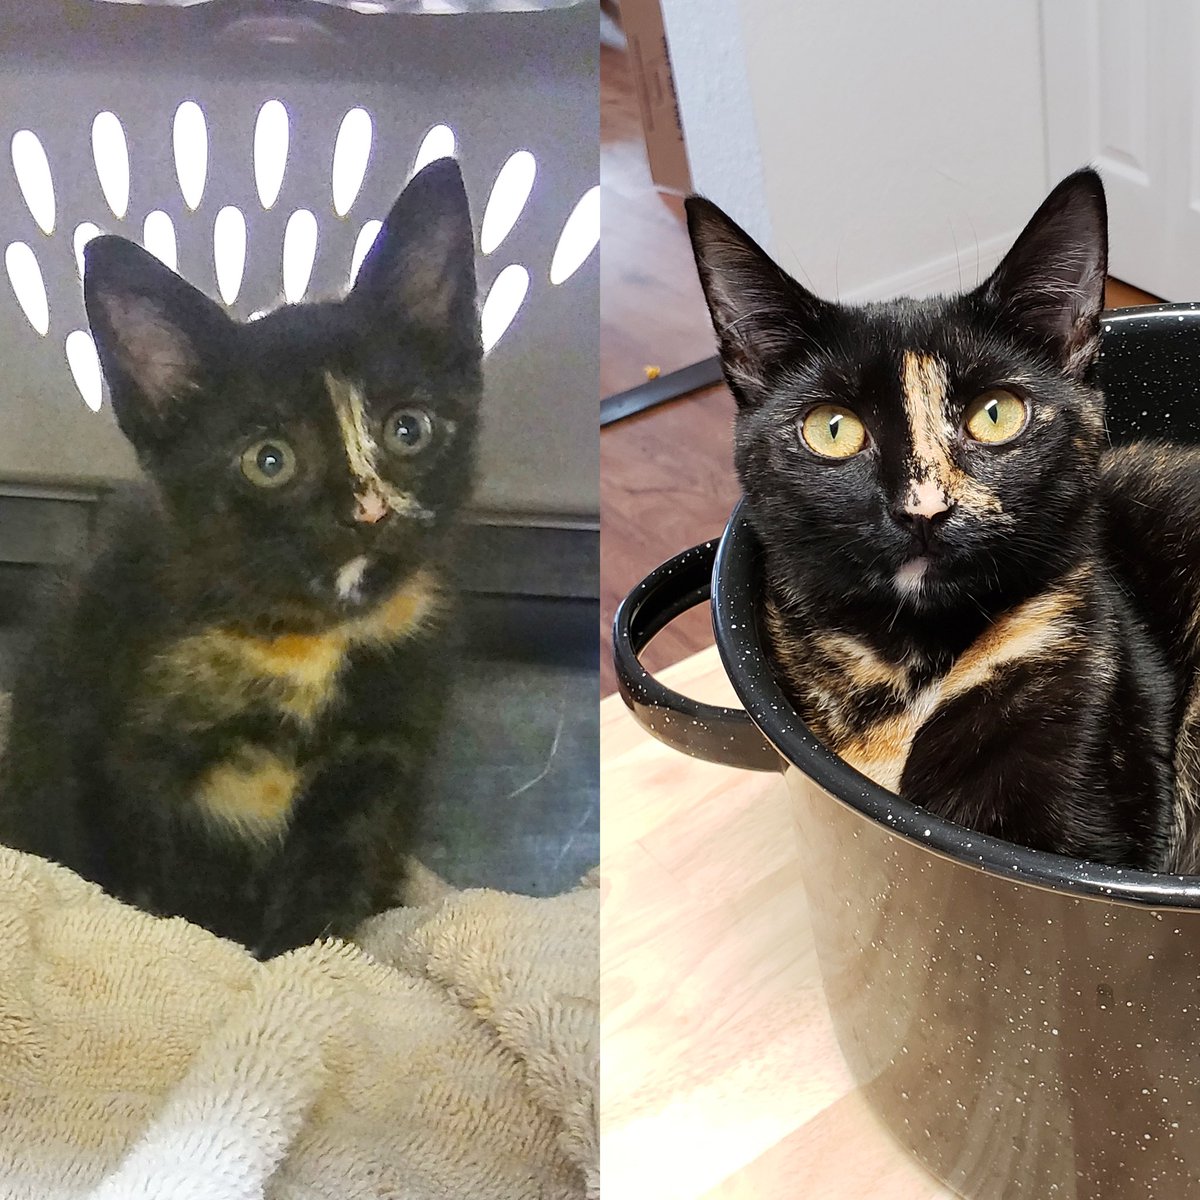 A tortie transfurmation 🖤🧡💛

Zig Zag is a independent cat, very elegant/regal looking and she will let you know when she wants more attention 🐾

Also responds to Ziggy Biggles and Queen Bean 🙂

#TortieTuesday #TransformationTuesday #tortiesofinstagram #cats